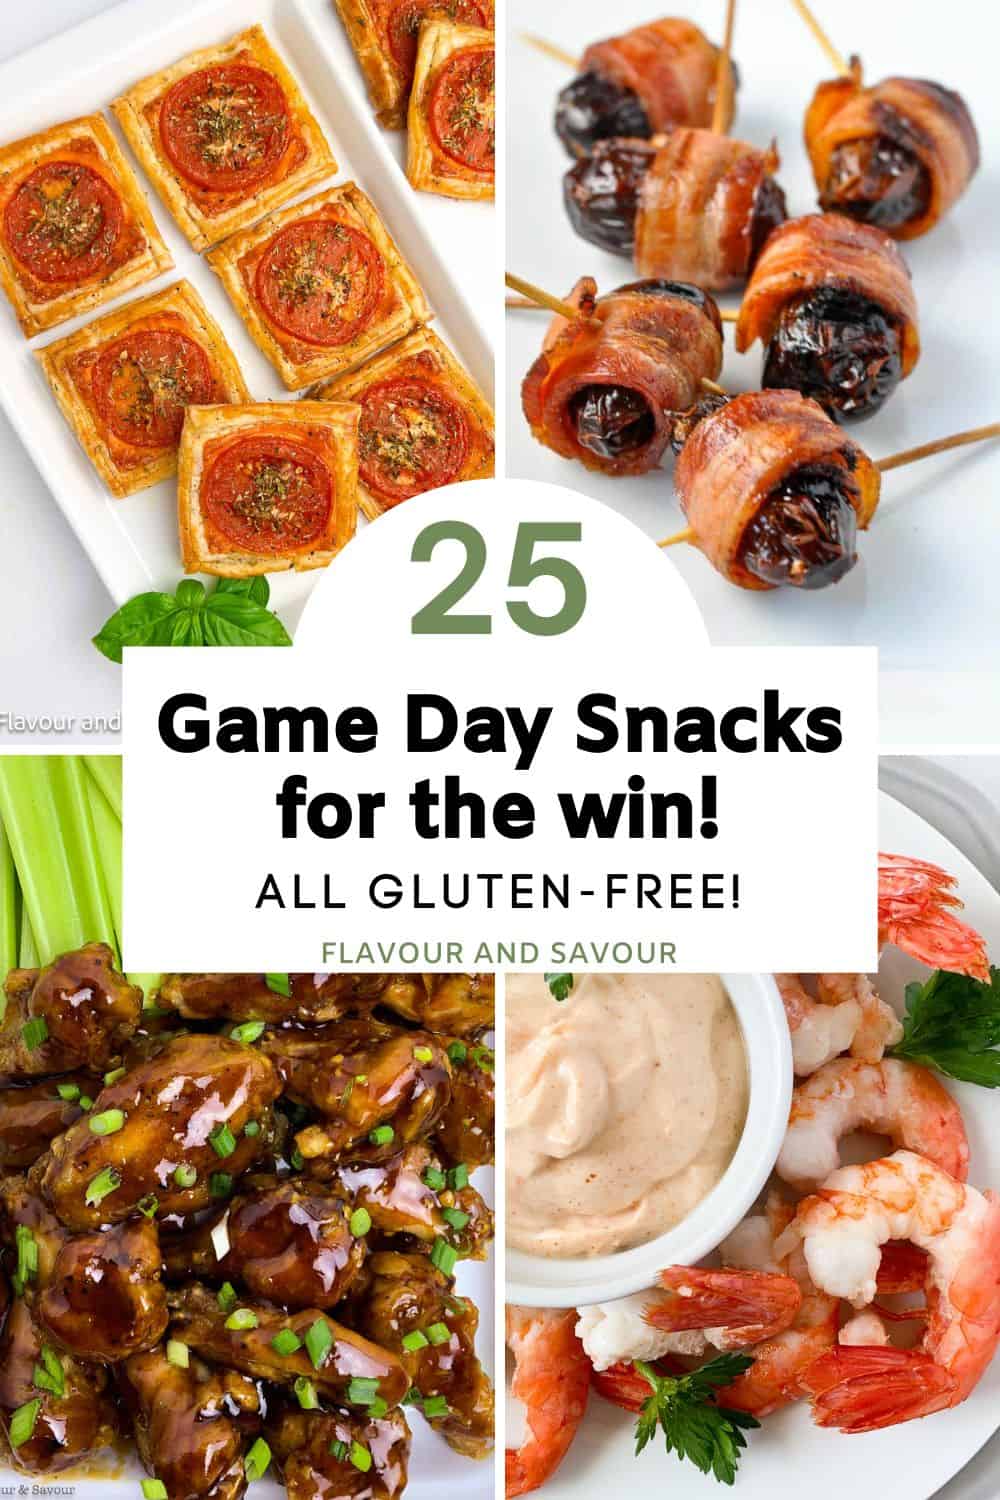 Image with text overlay for 25 game day snacks, all gluten-free.